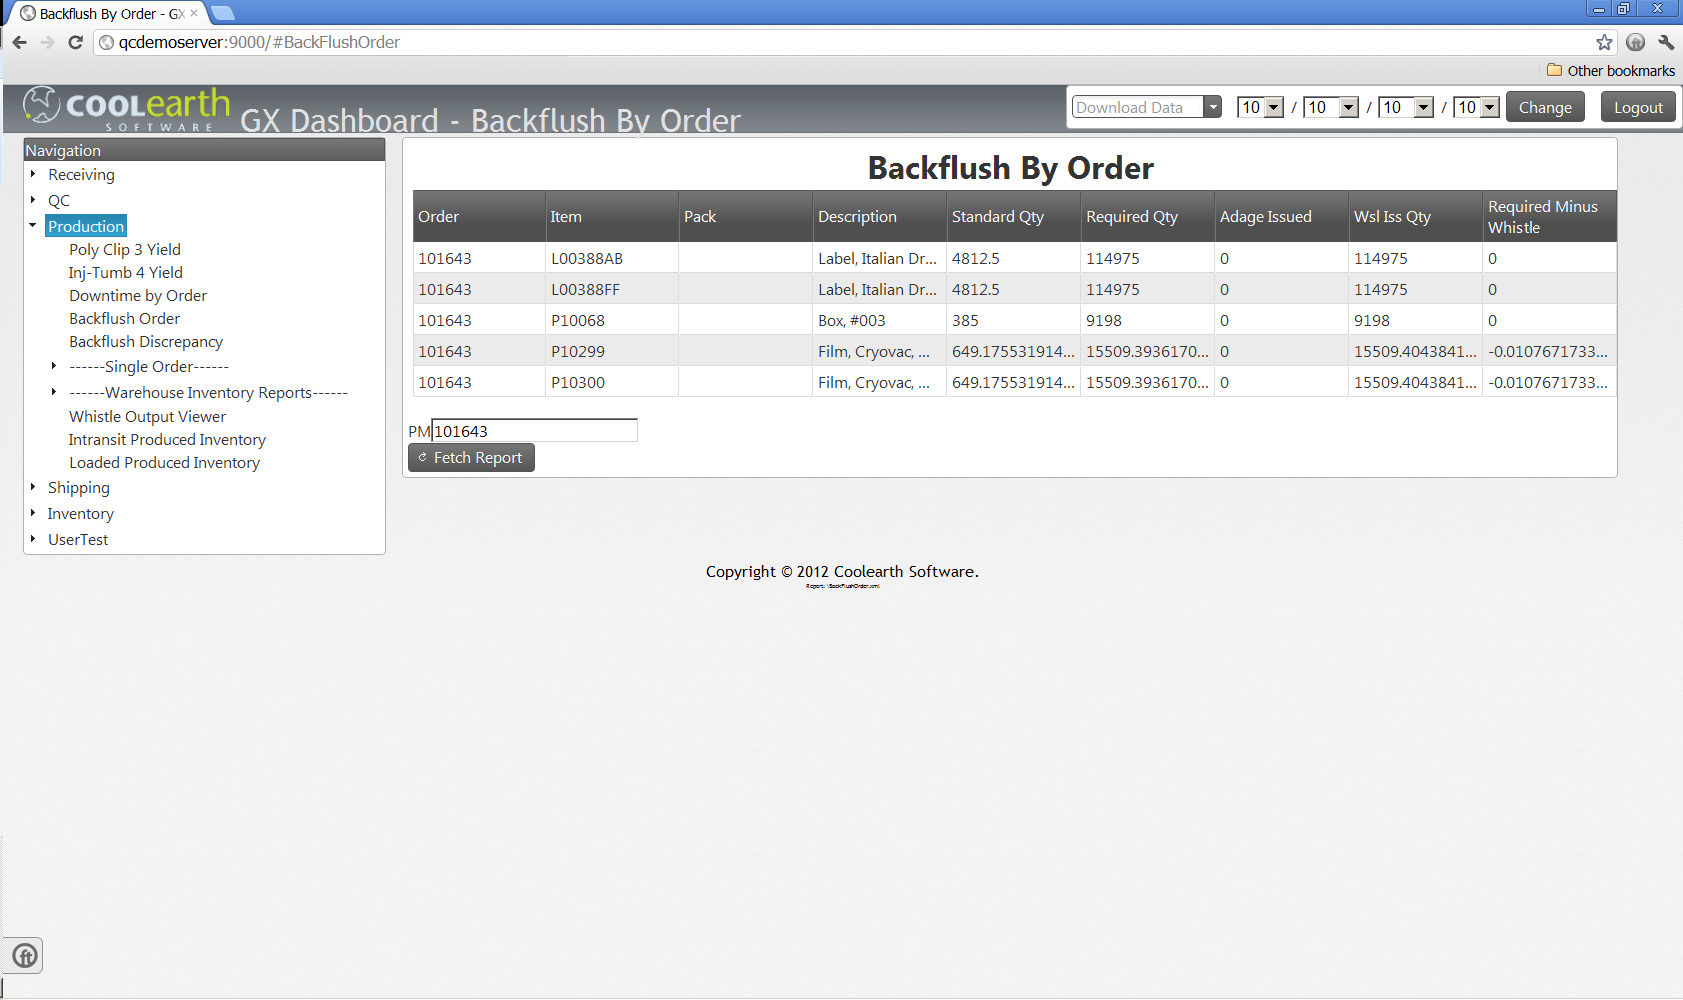 File:20120504182747!Backflush by order.png